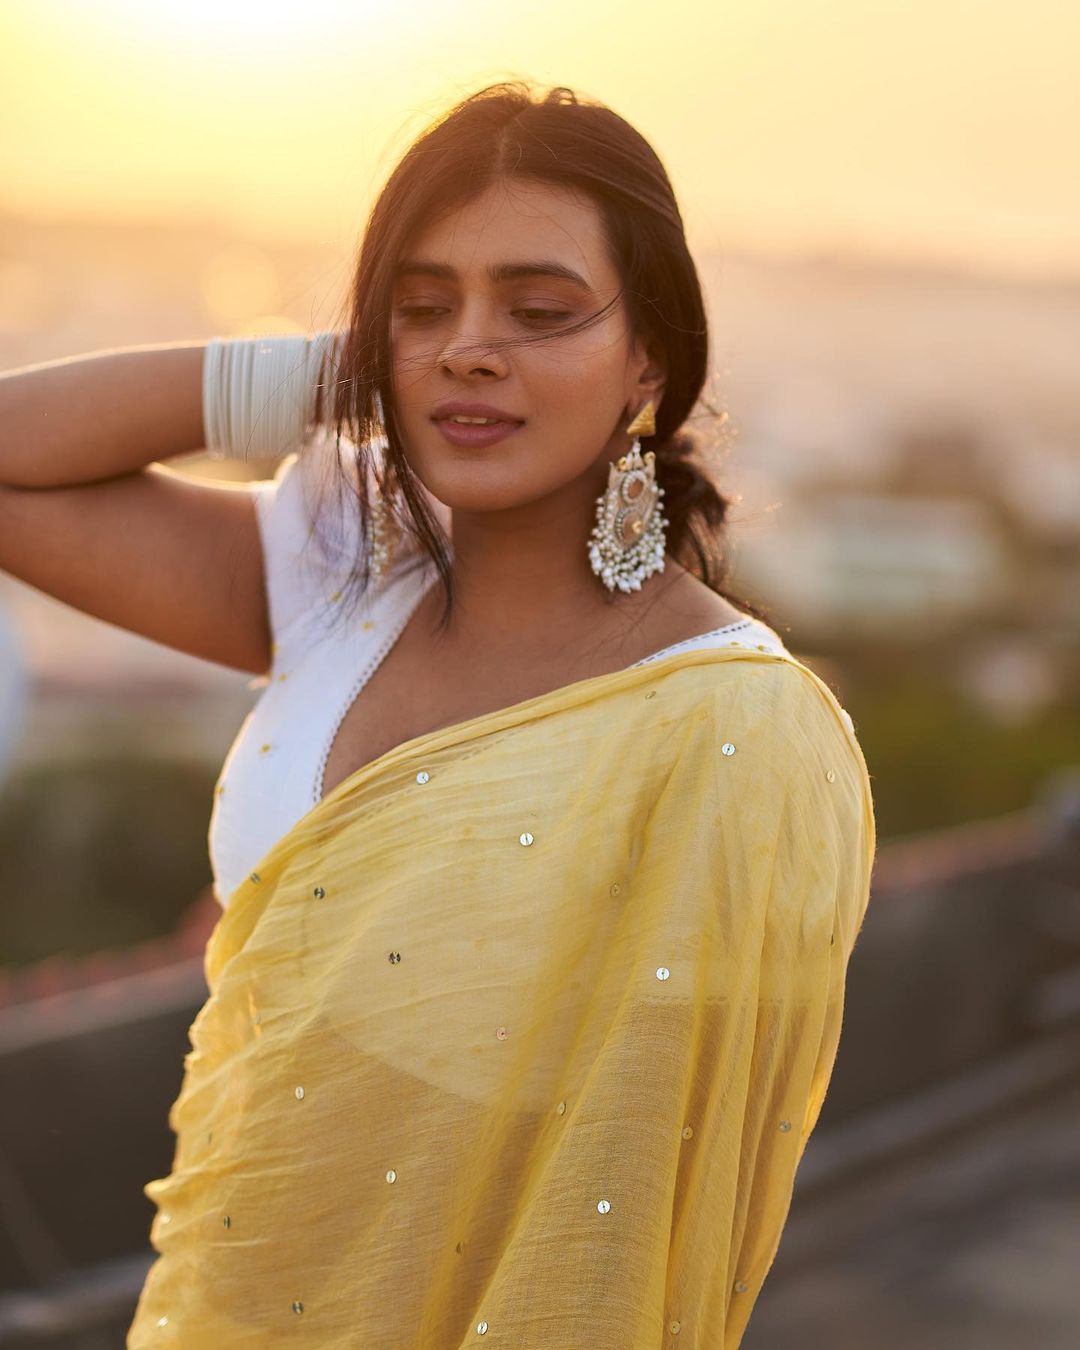 betty ours recommends Hebah Patel Hot